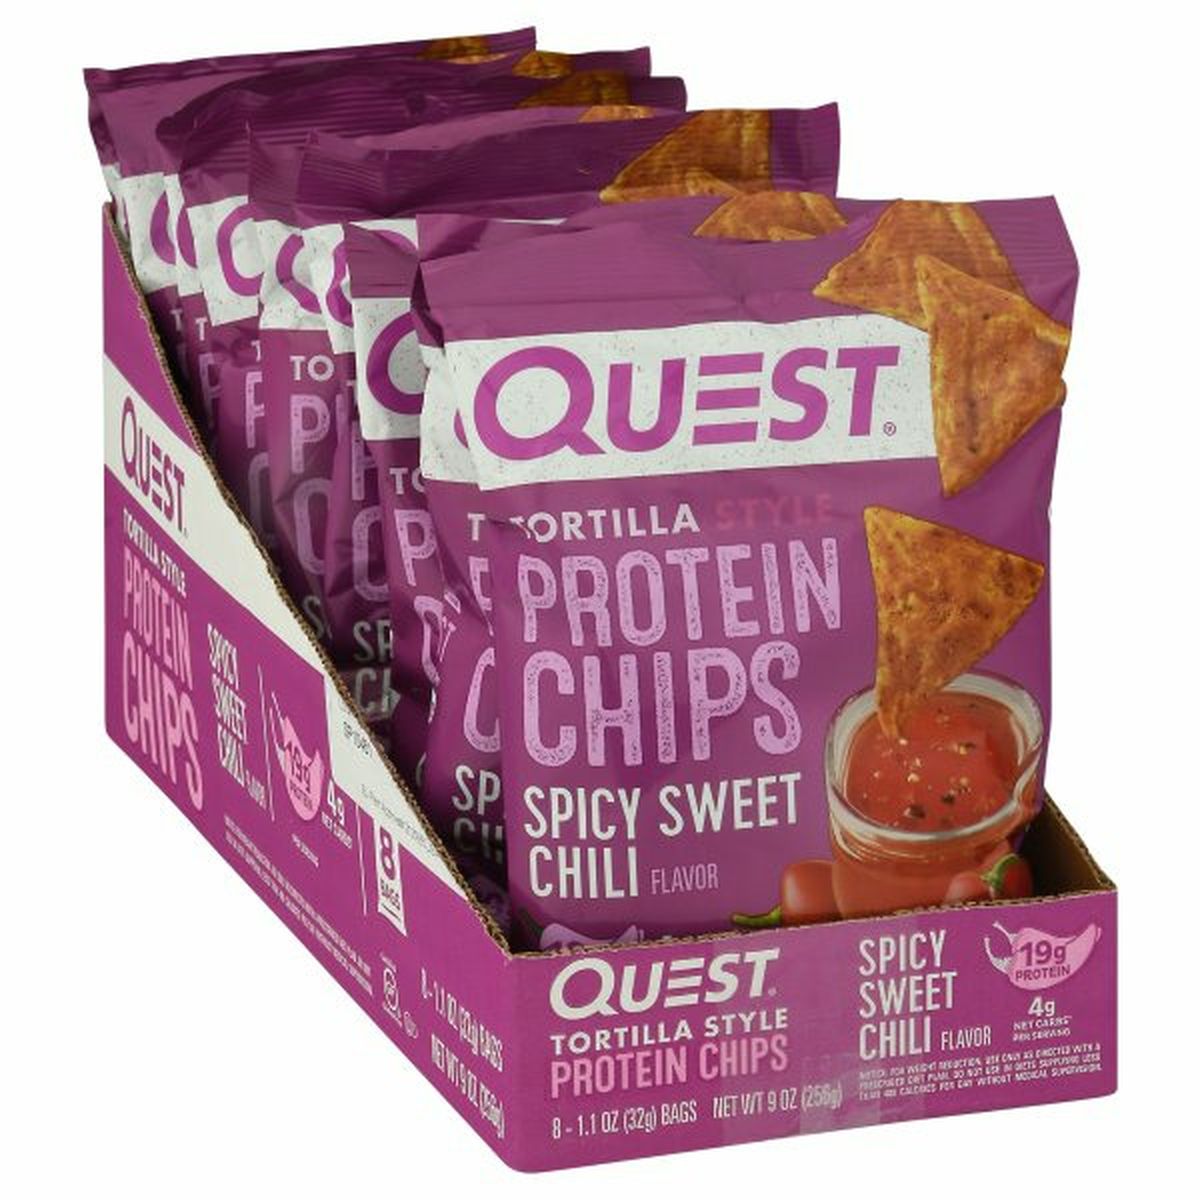 Calories in Quest Protein Chips, Tortilla Style, Spicy Sweet Chili